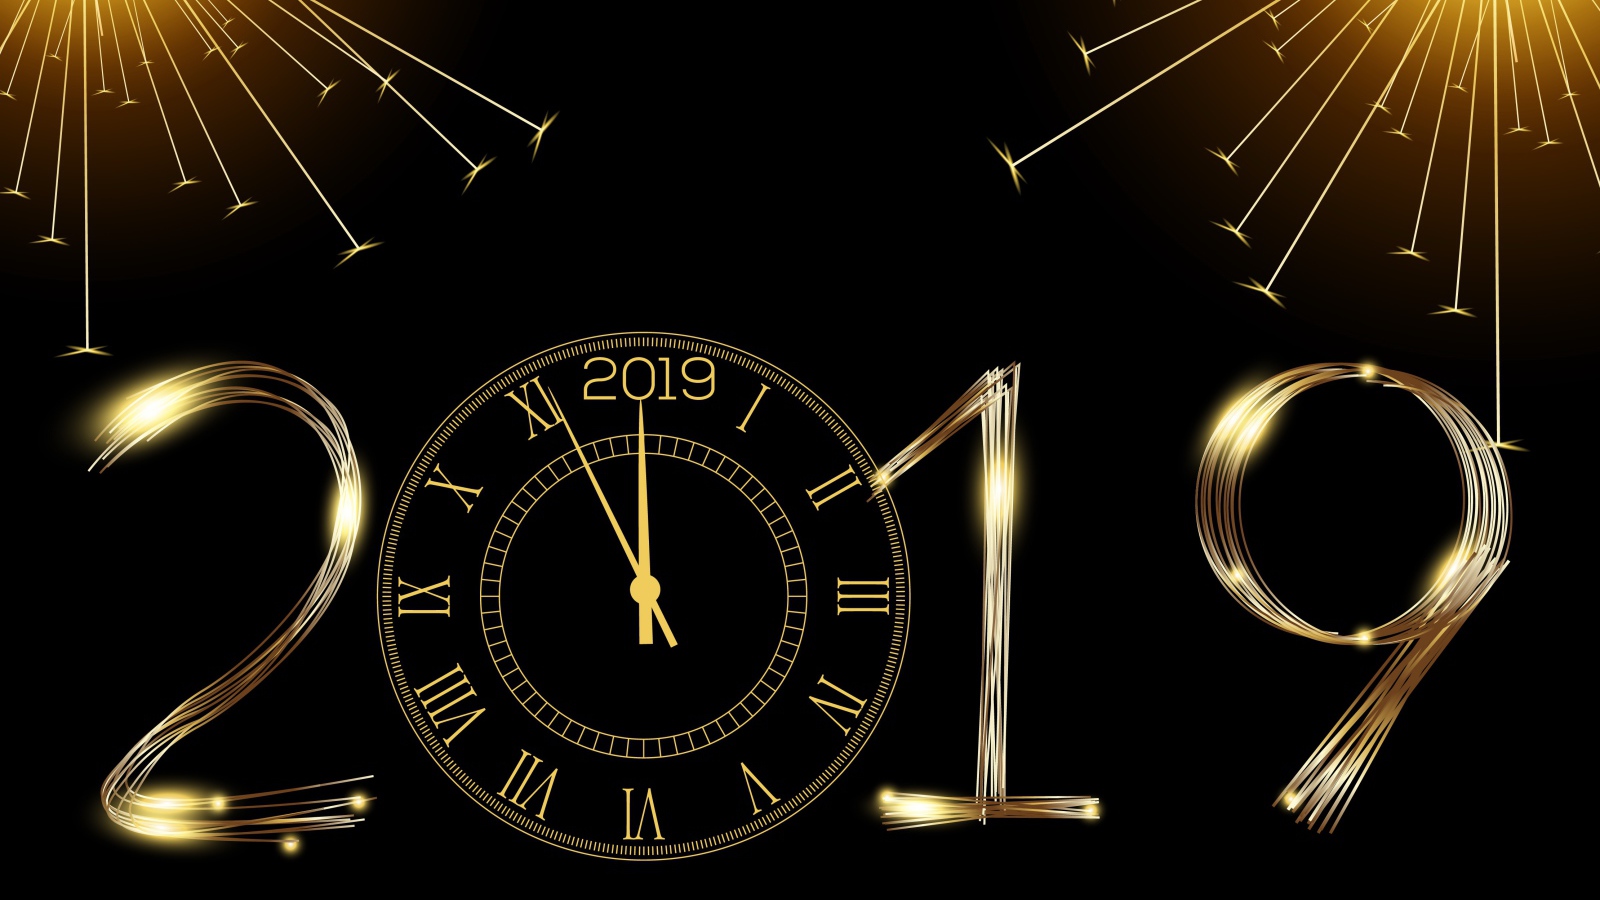 Bright numbers 2019 with a clock on a black background.